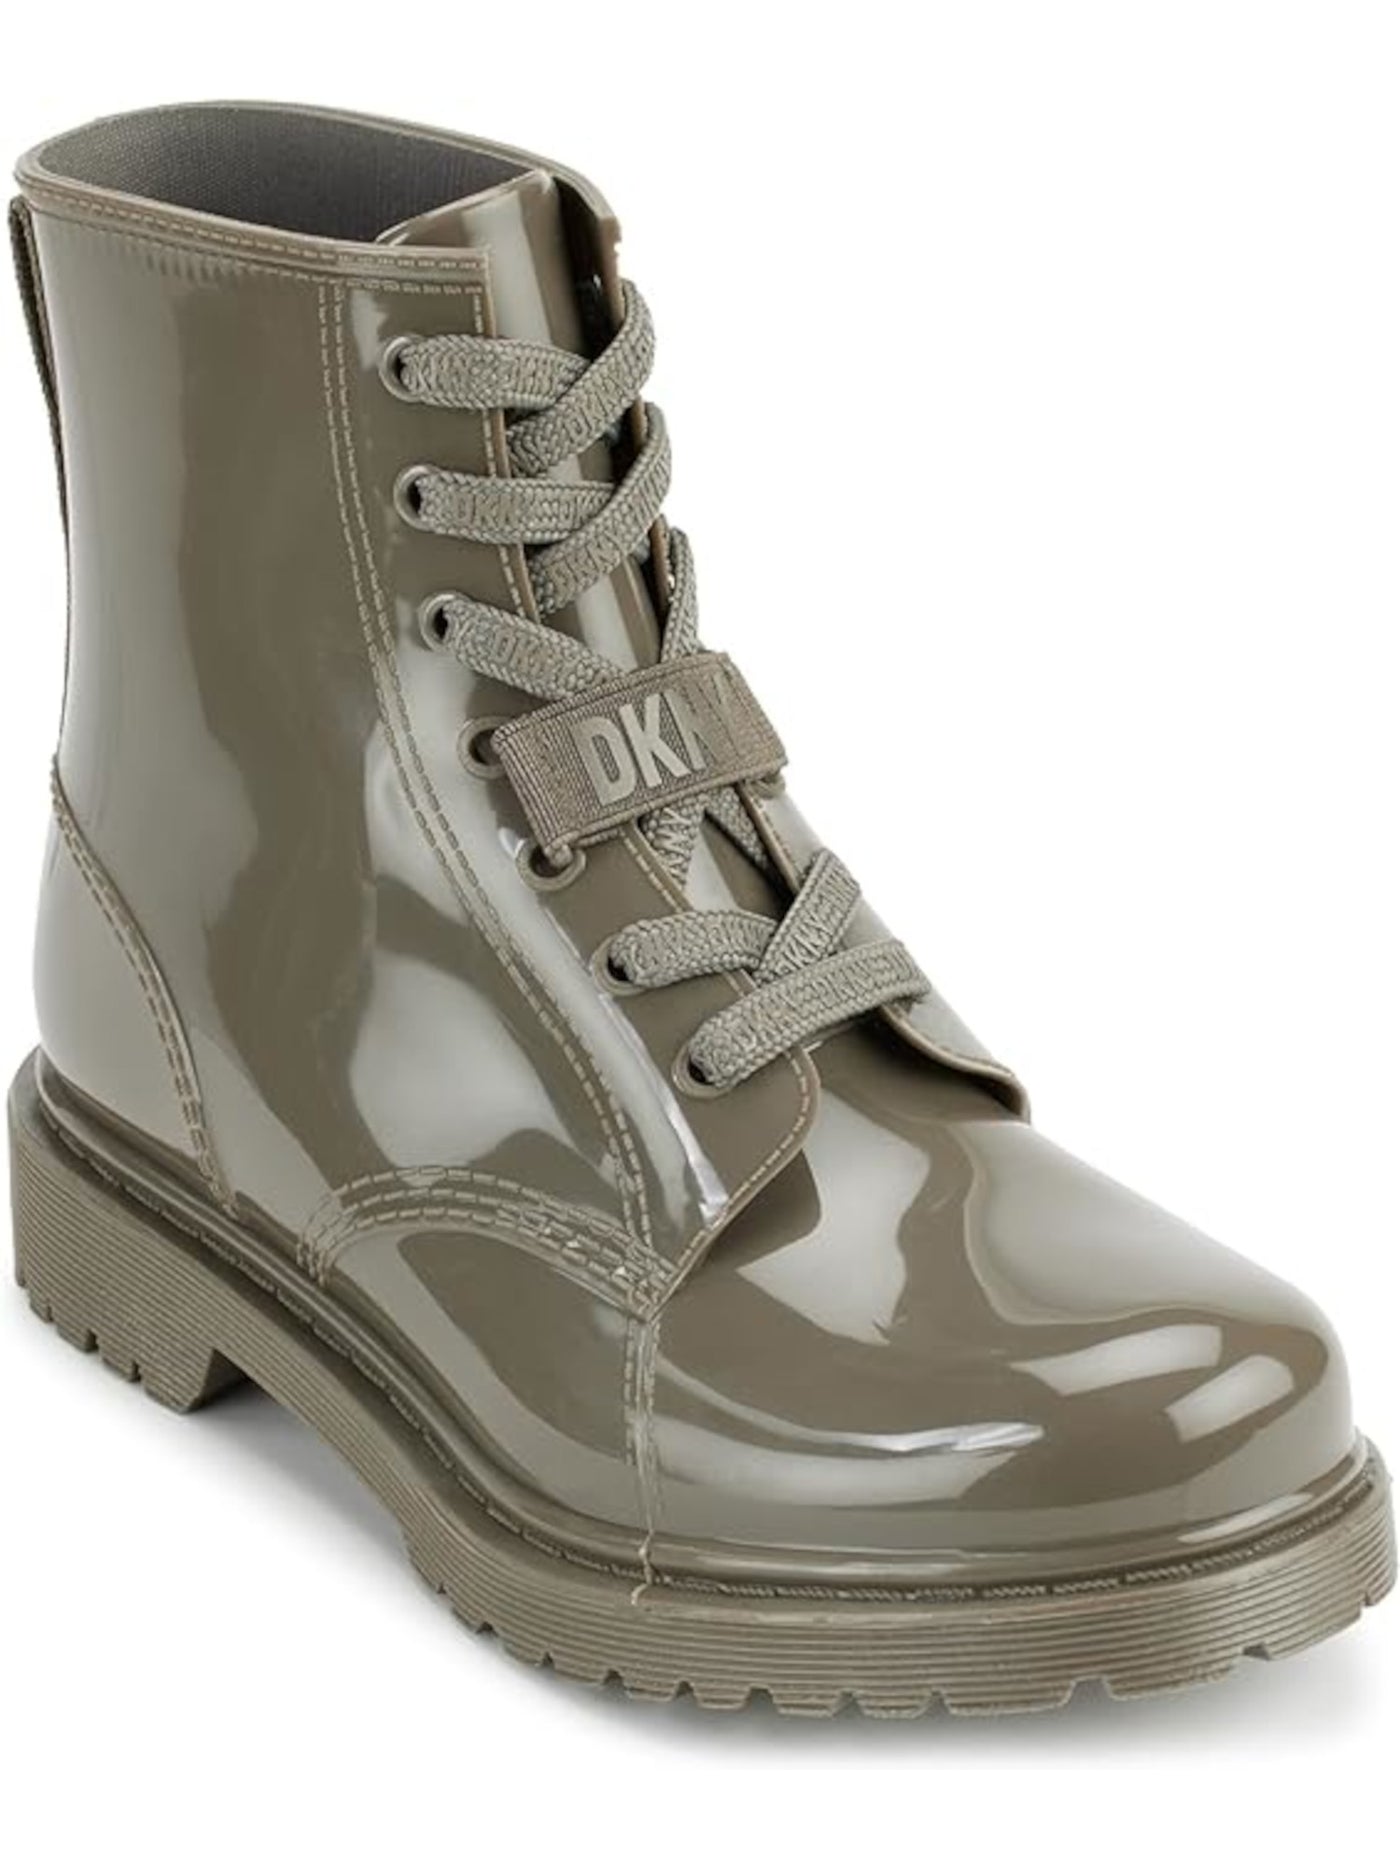 DKNY Womens Gray Back Pull-Tab Waterproof Padded Tilly Round Toe Block Heel Lace-Up Rain Boots 8 M